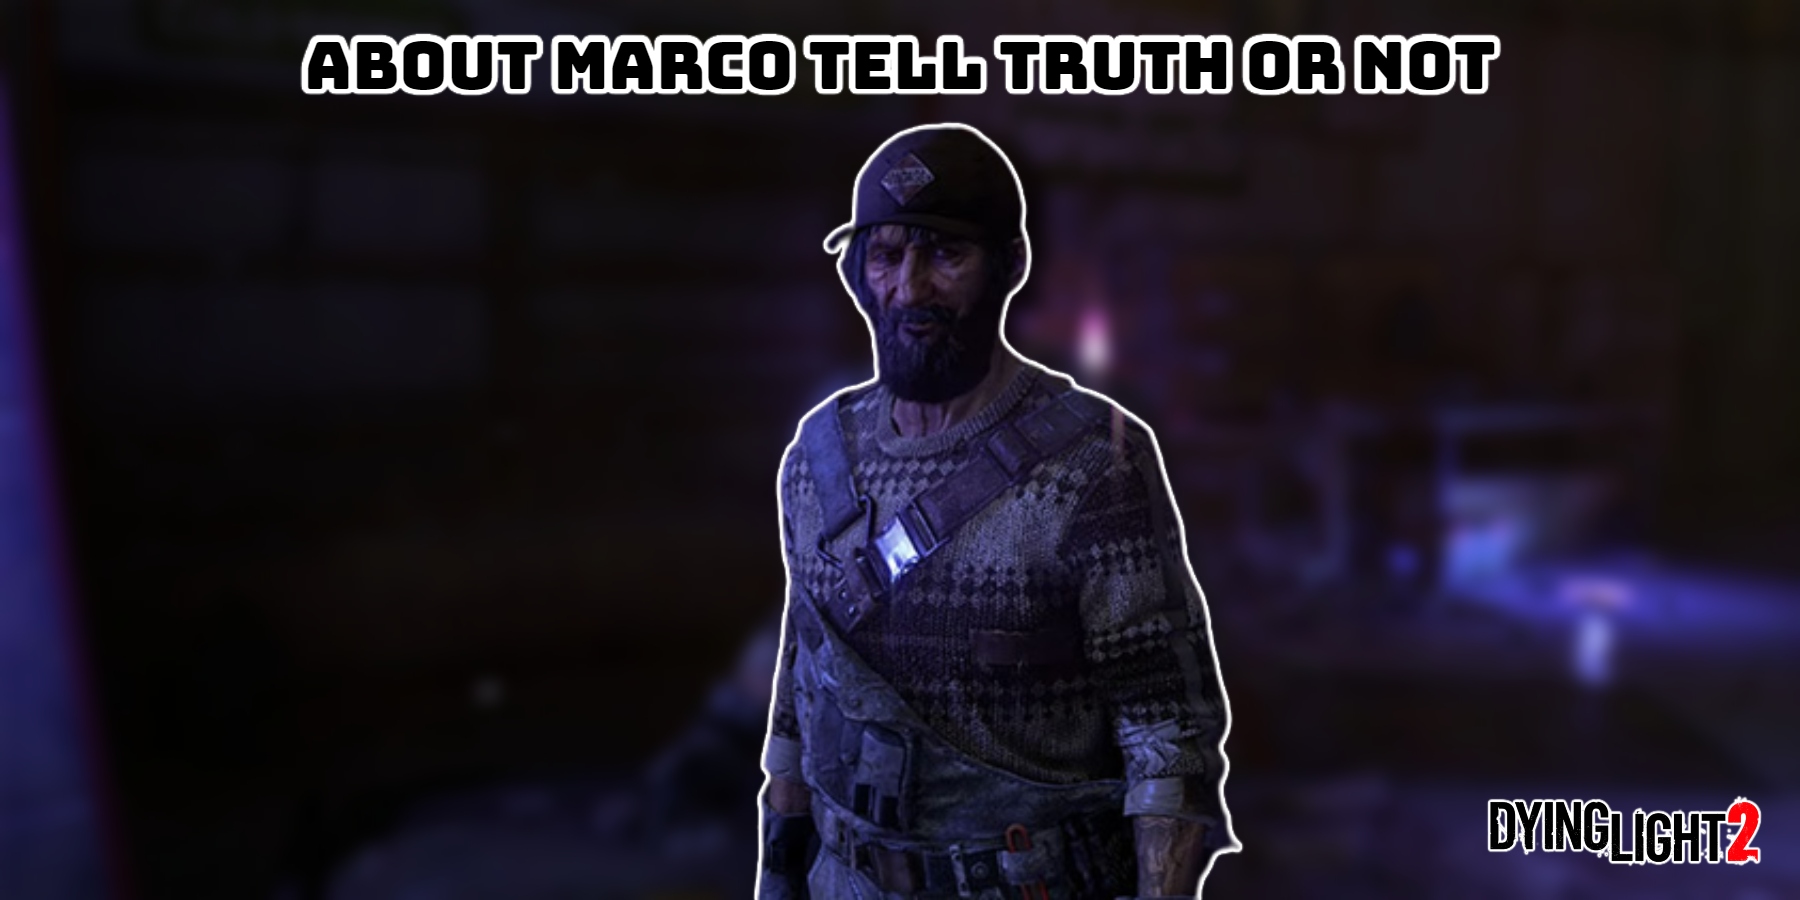 You are currently viewing Dying Light 2: About Marco Tell Truth Or Not